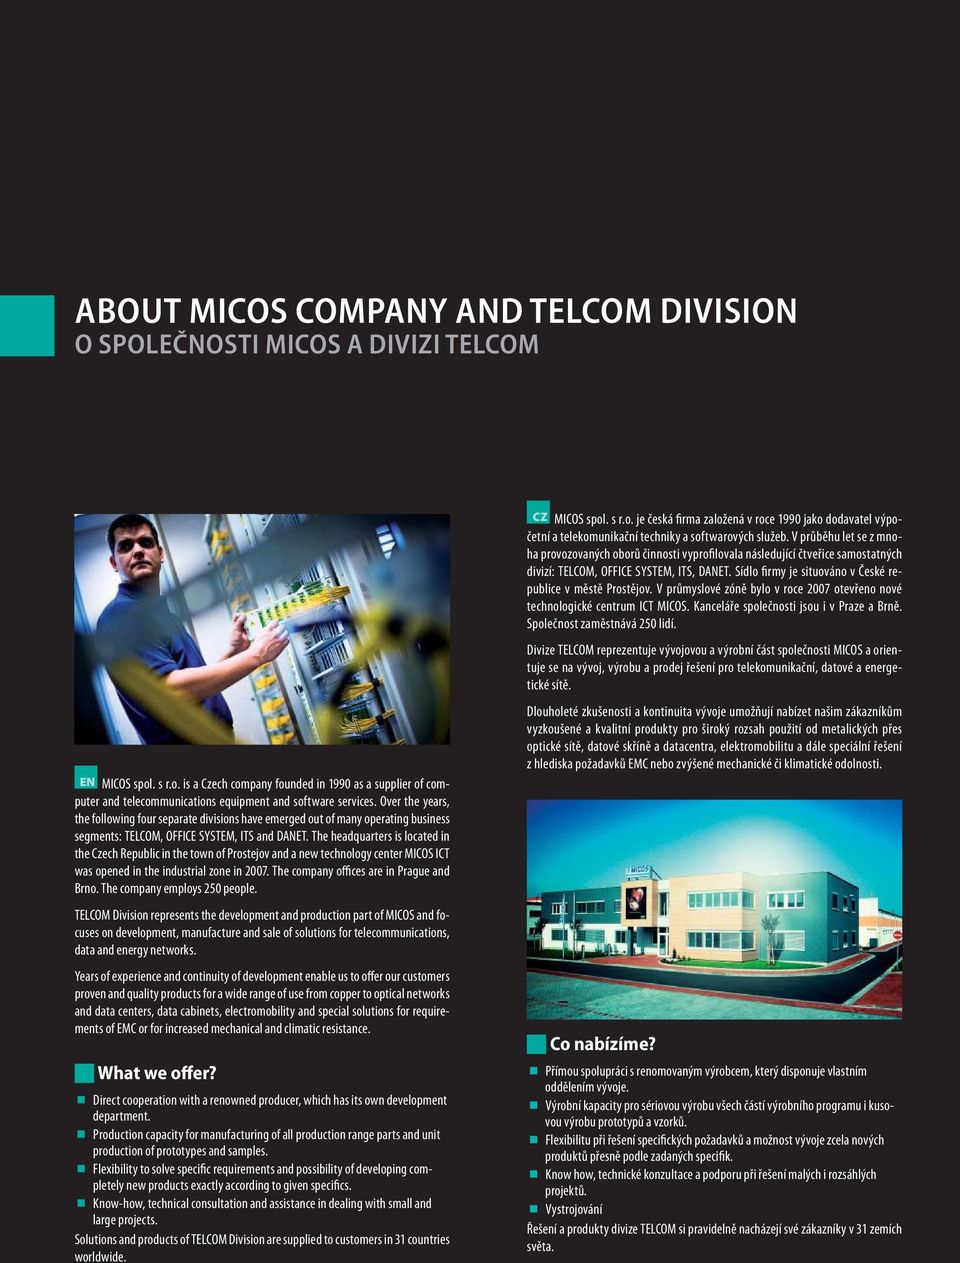 Over the years, the following four separate divisions have emerged out of many operating business segments: TELCOM, OFFICE SYSTEM, ITS and DANET.